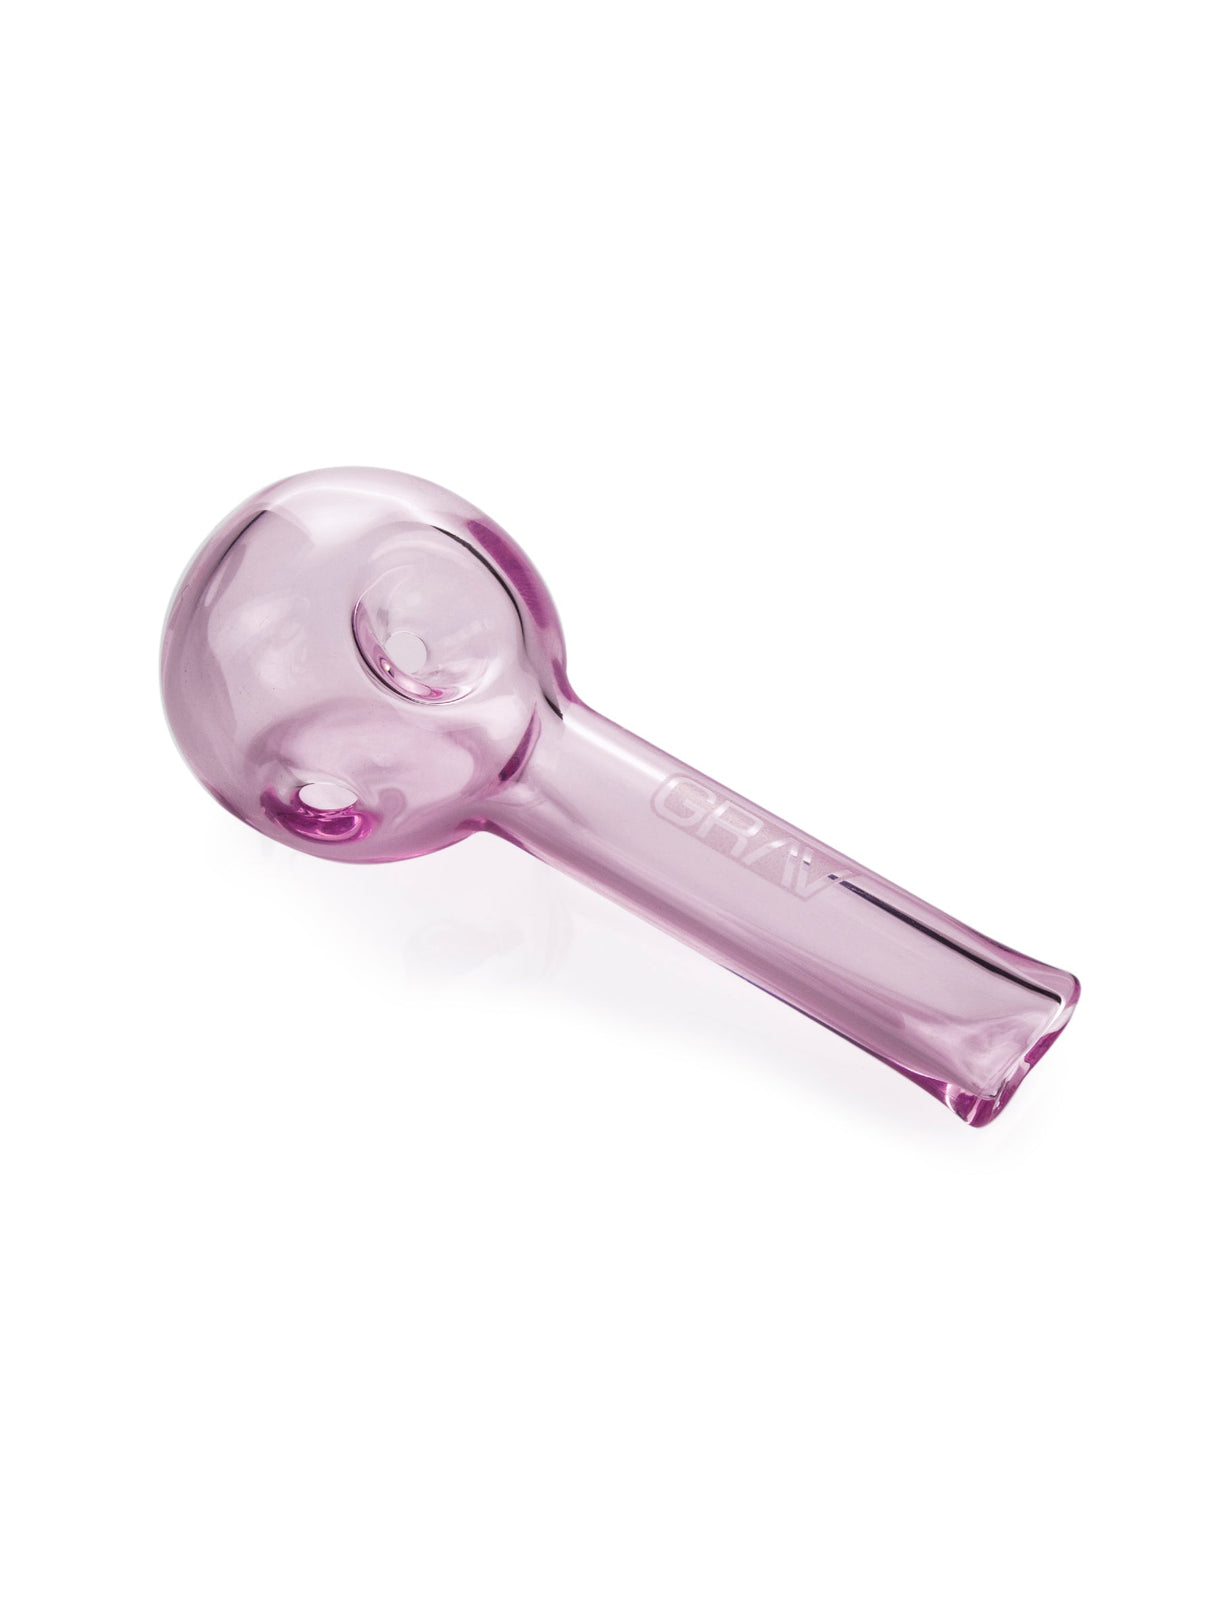 GRAV Pinch Spoon Hand Pipe in Pink - Compact Borosilicate Glass, Easy for Travel, 3.25" Length